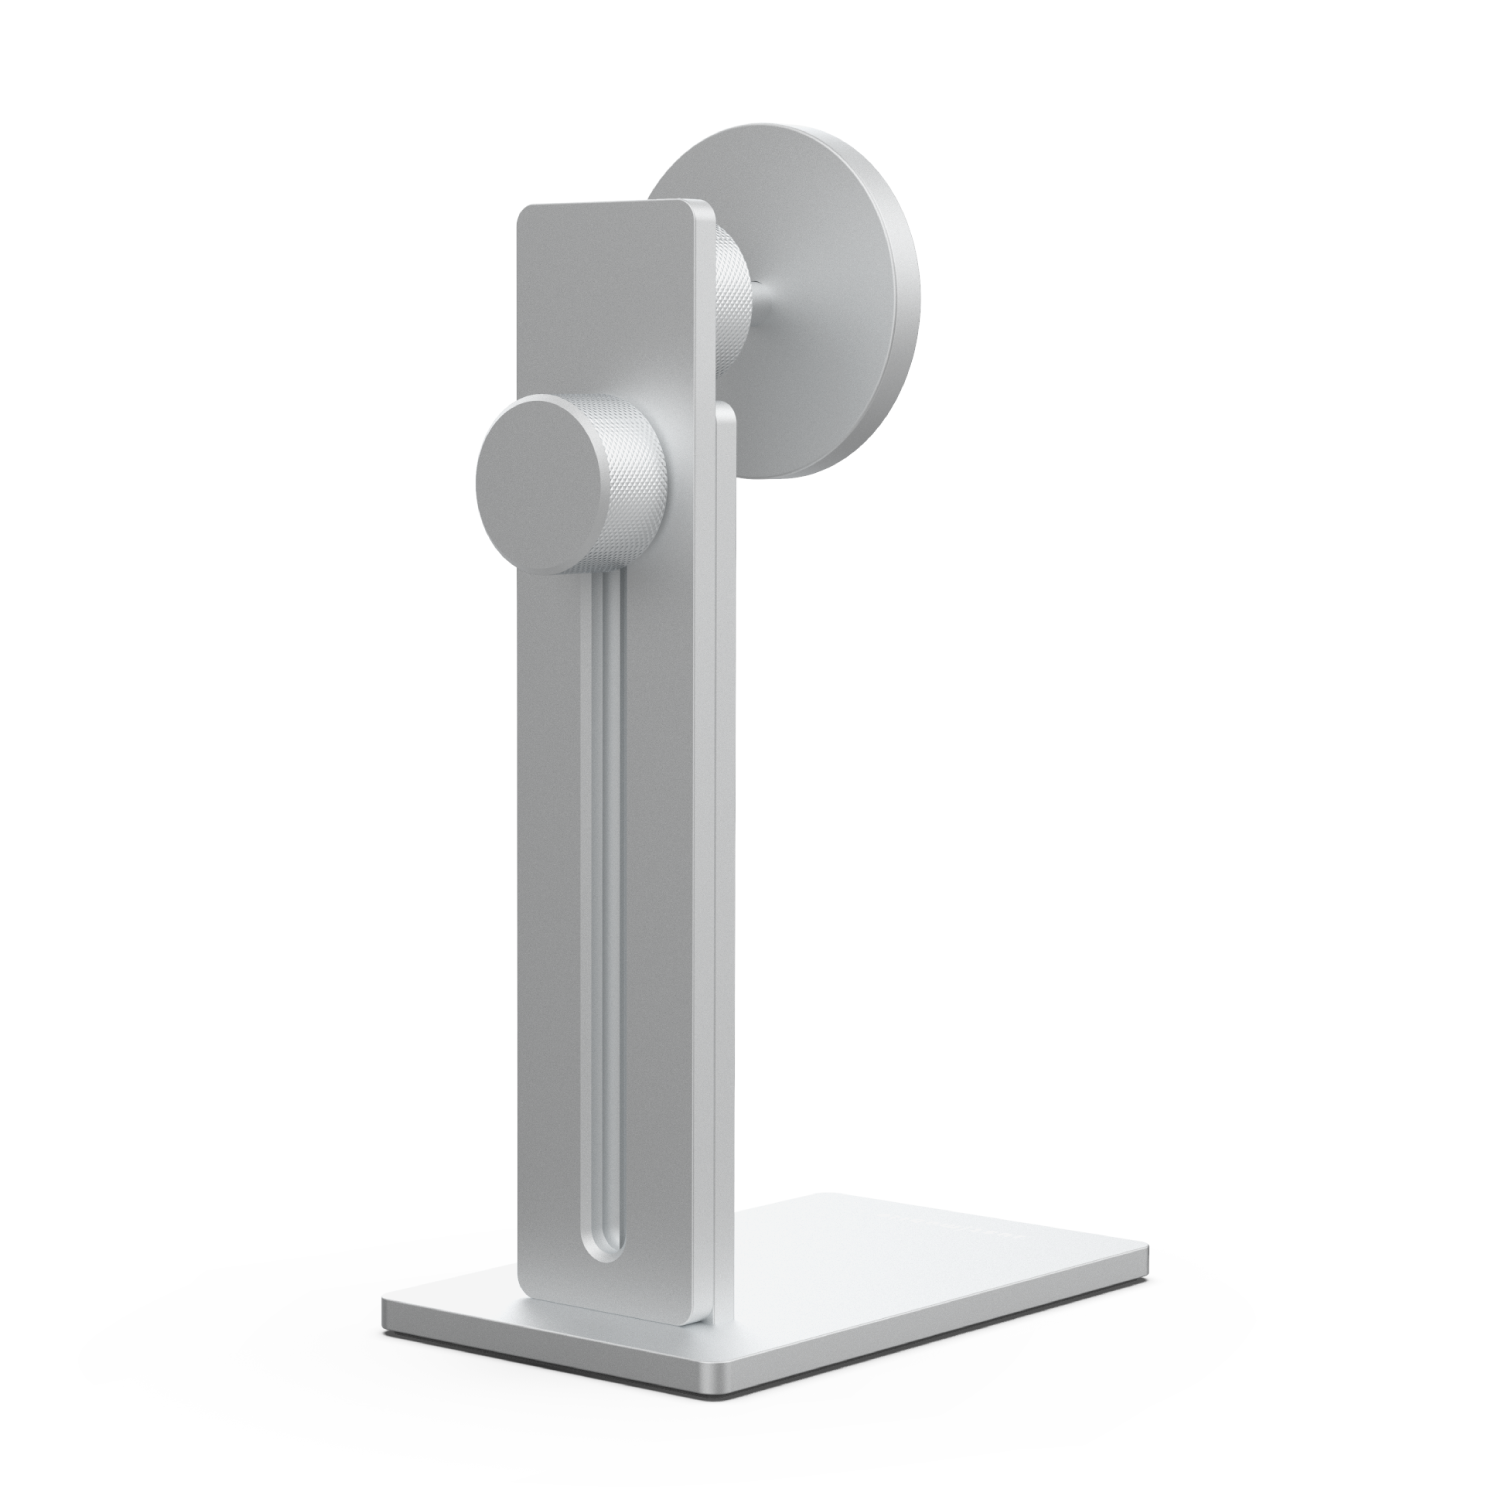 JustMobile AluDisc Pro Smartphone Stand - Storming Gravity